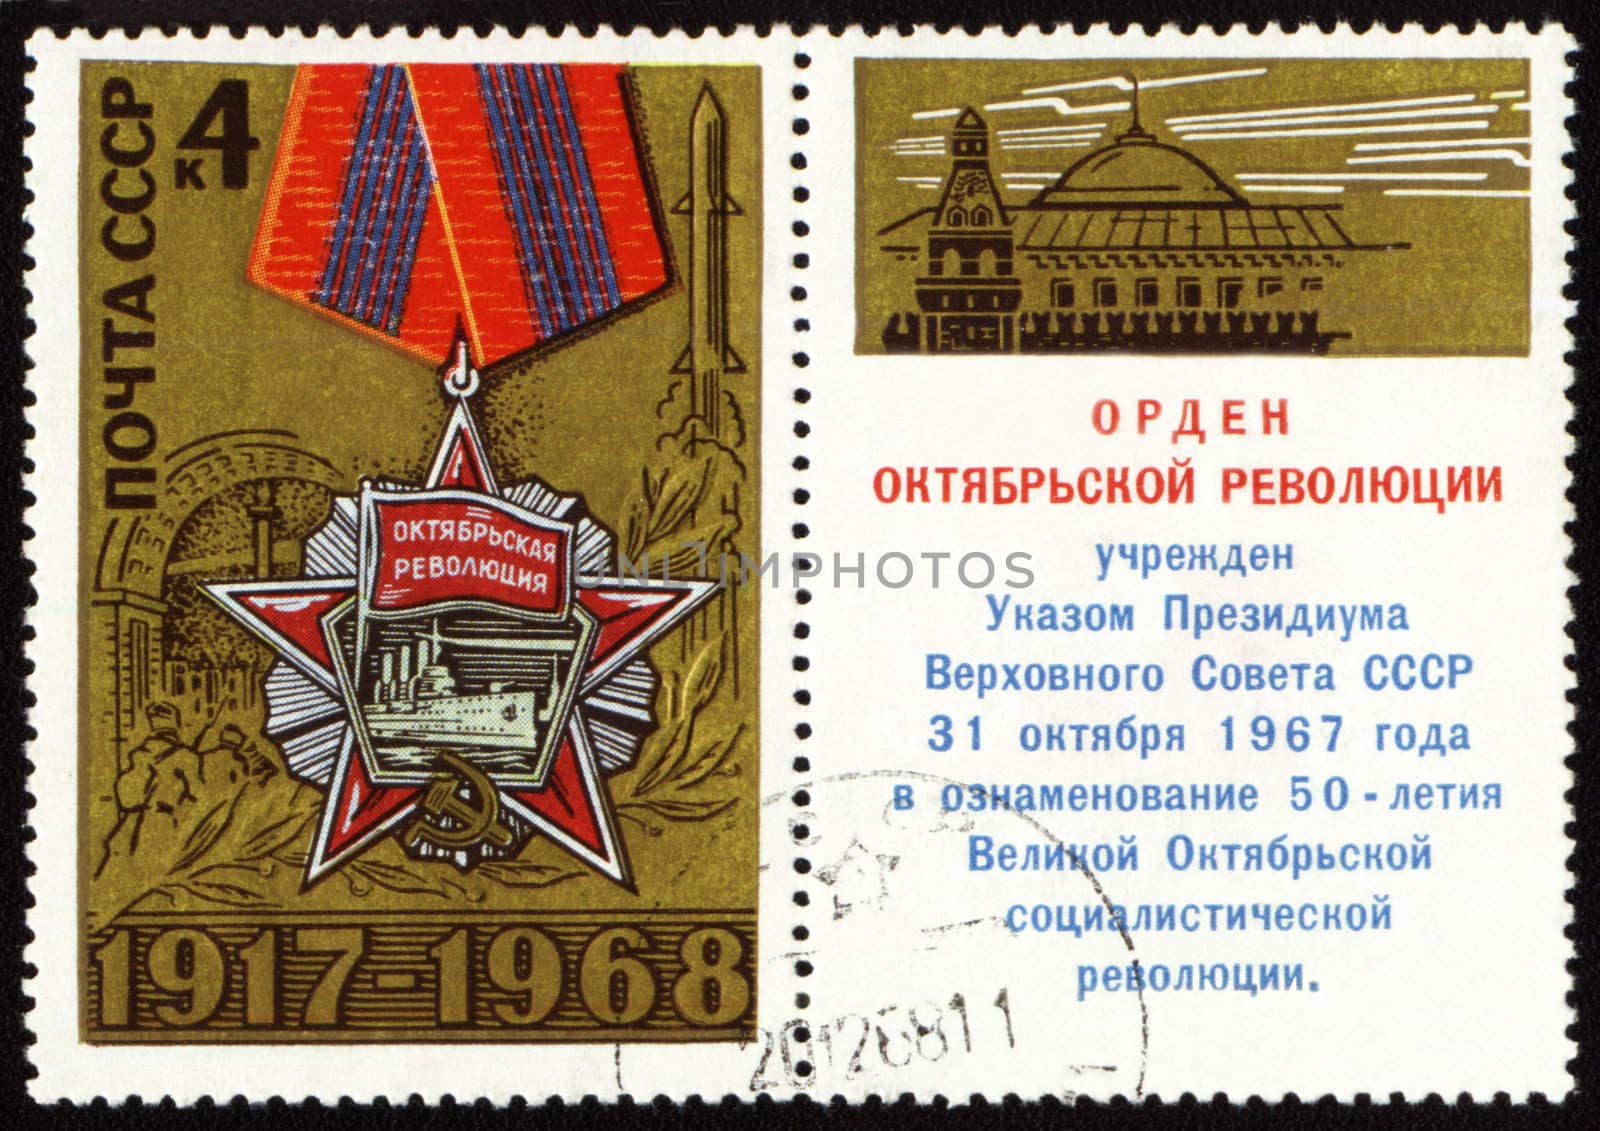 USSR - CIRCA 1968: post stamp printed in USSR shows Order of October Revolution, circa 1968